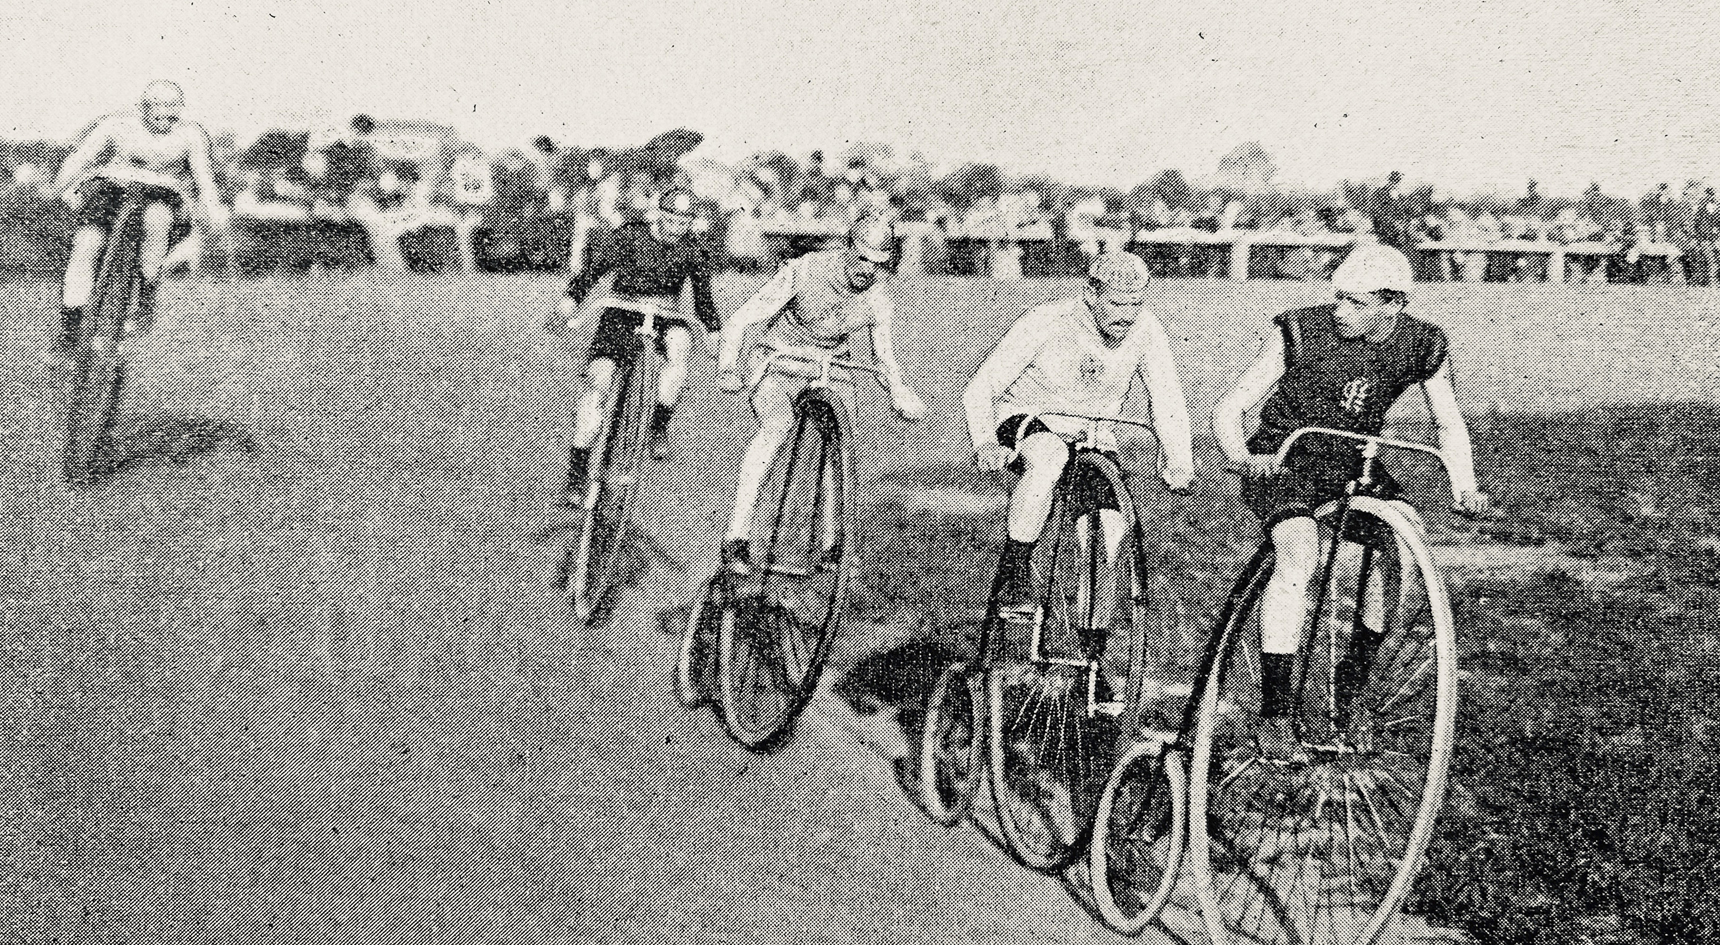 A black and white photo of people racing on penny farthings. 